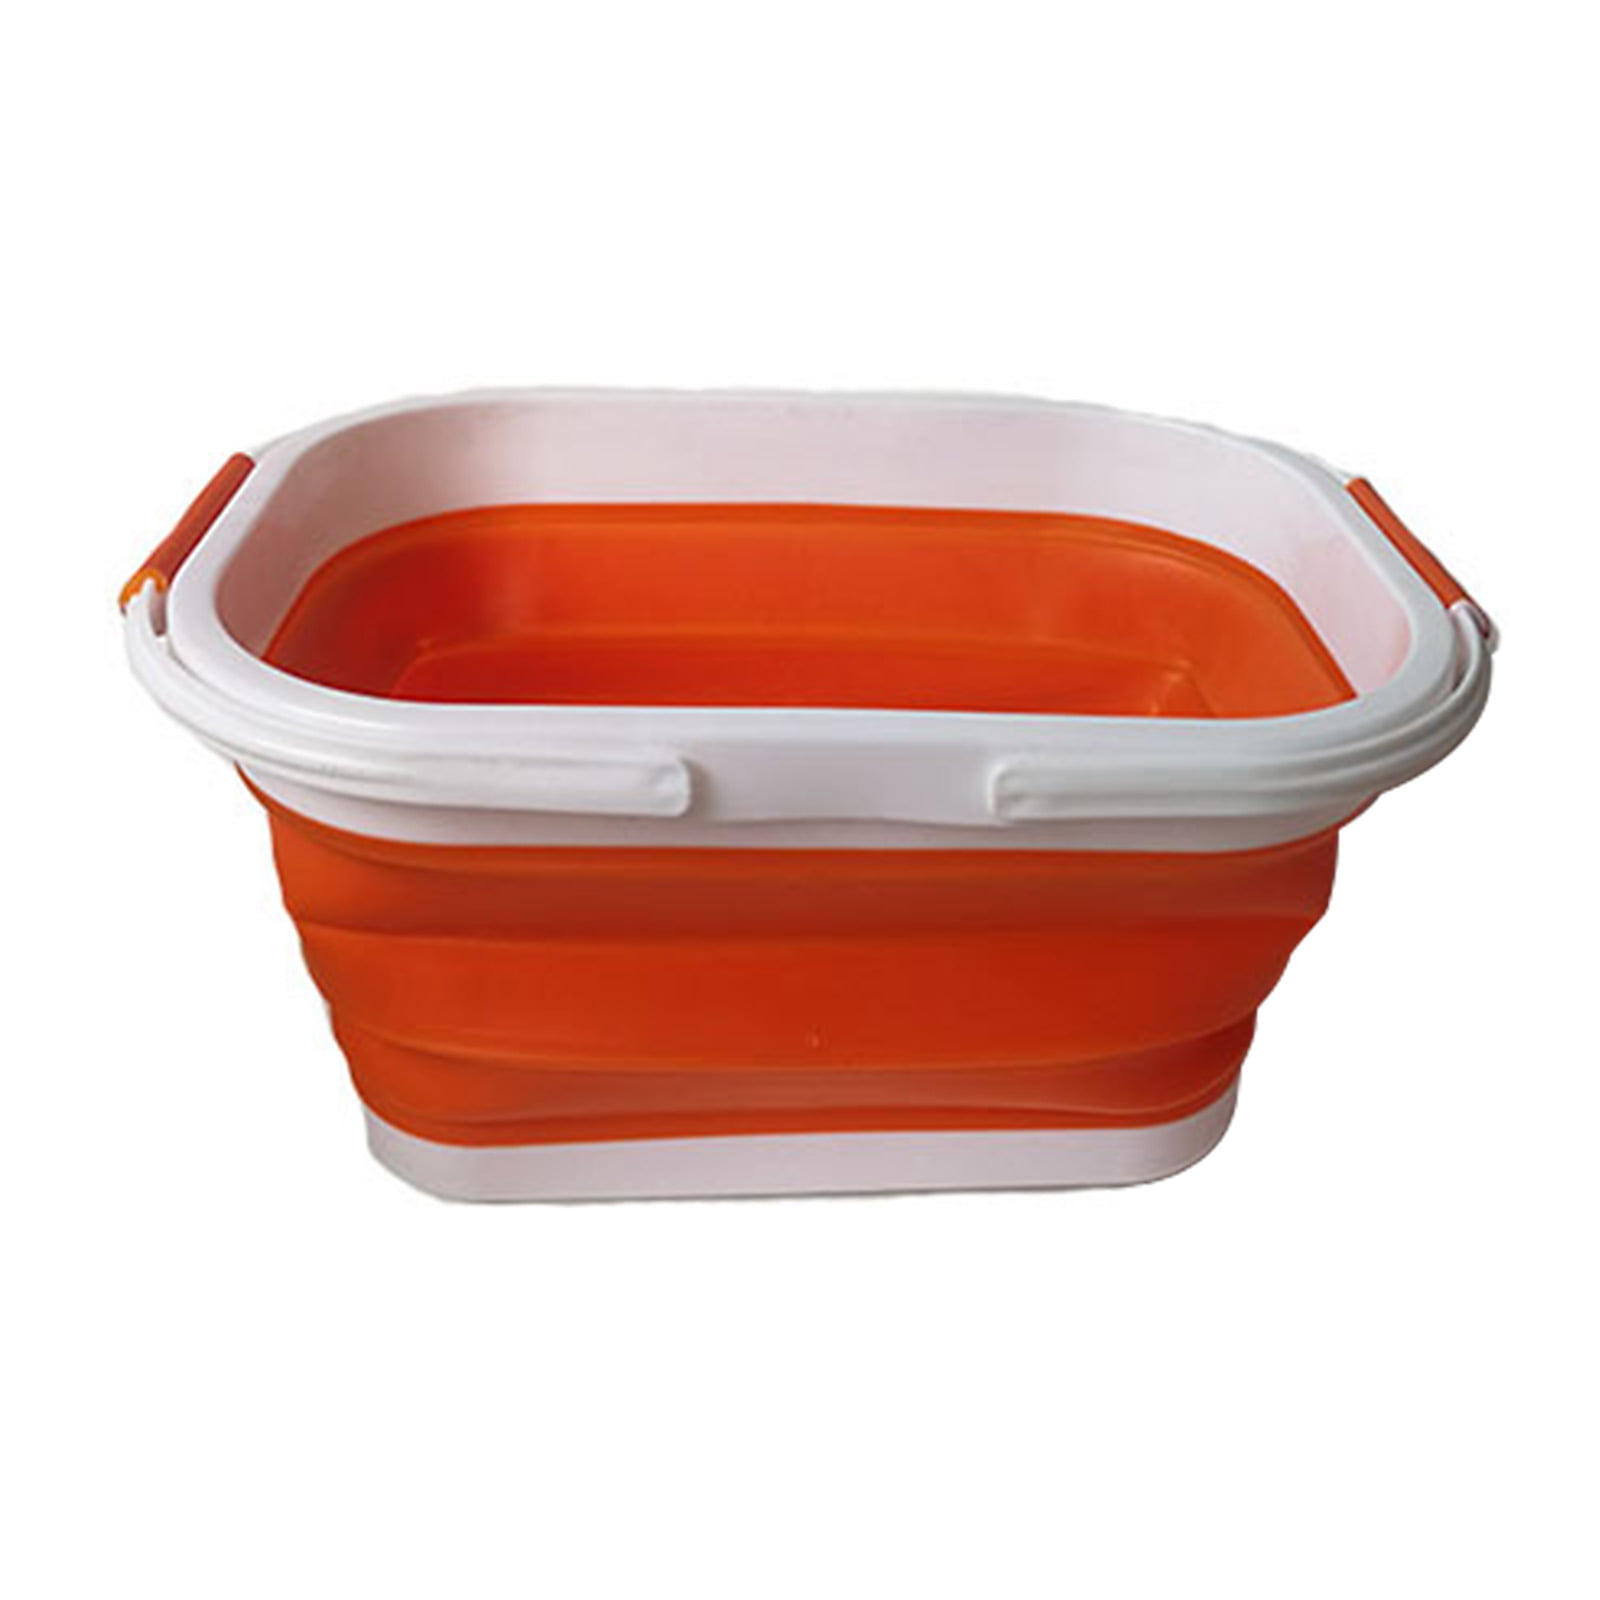 0.6L 6.9x4.3x2.8in Thick Practical Serving Basin Buffet Server for Home 